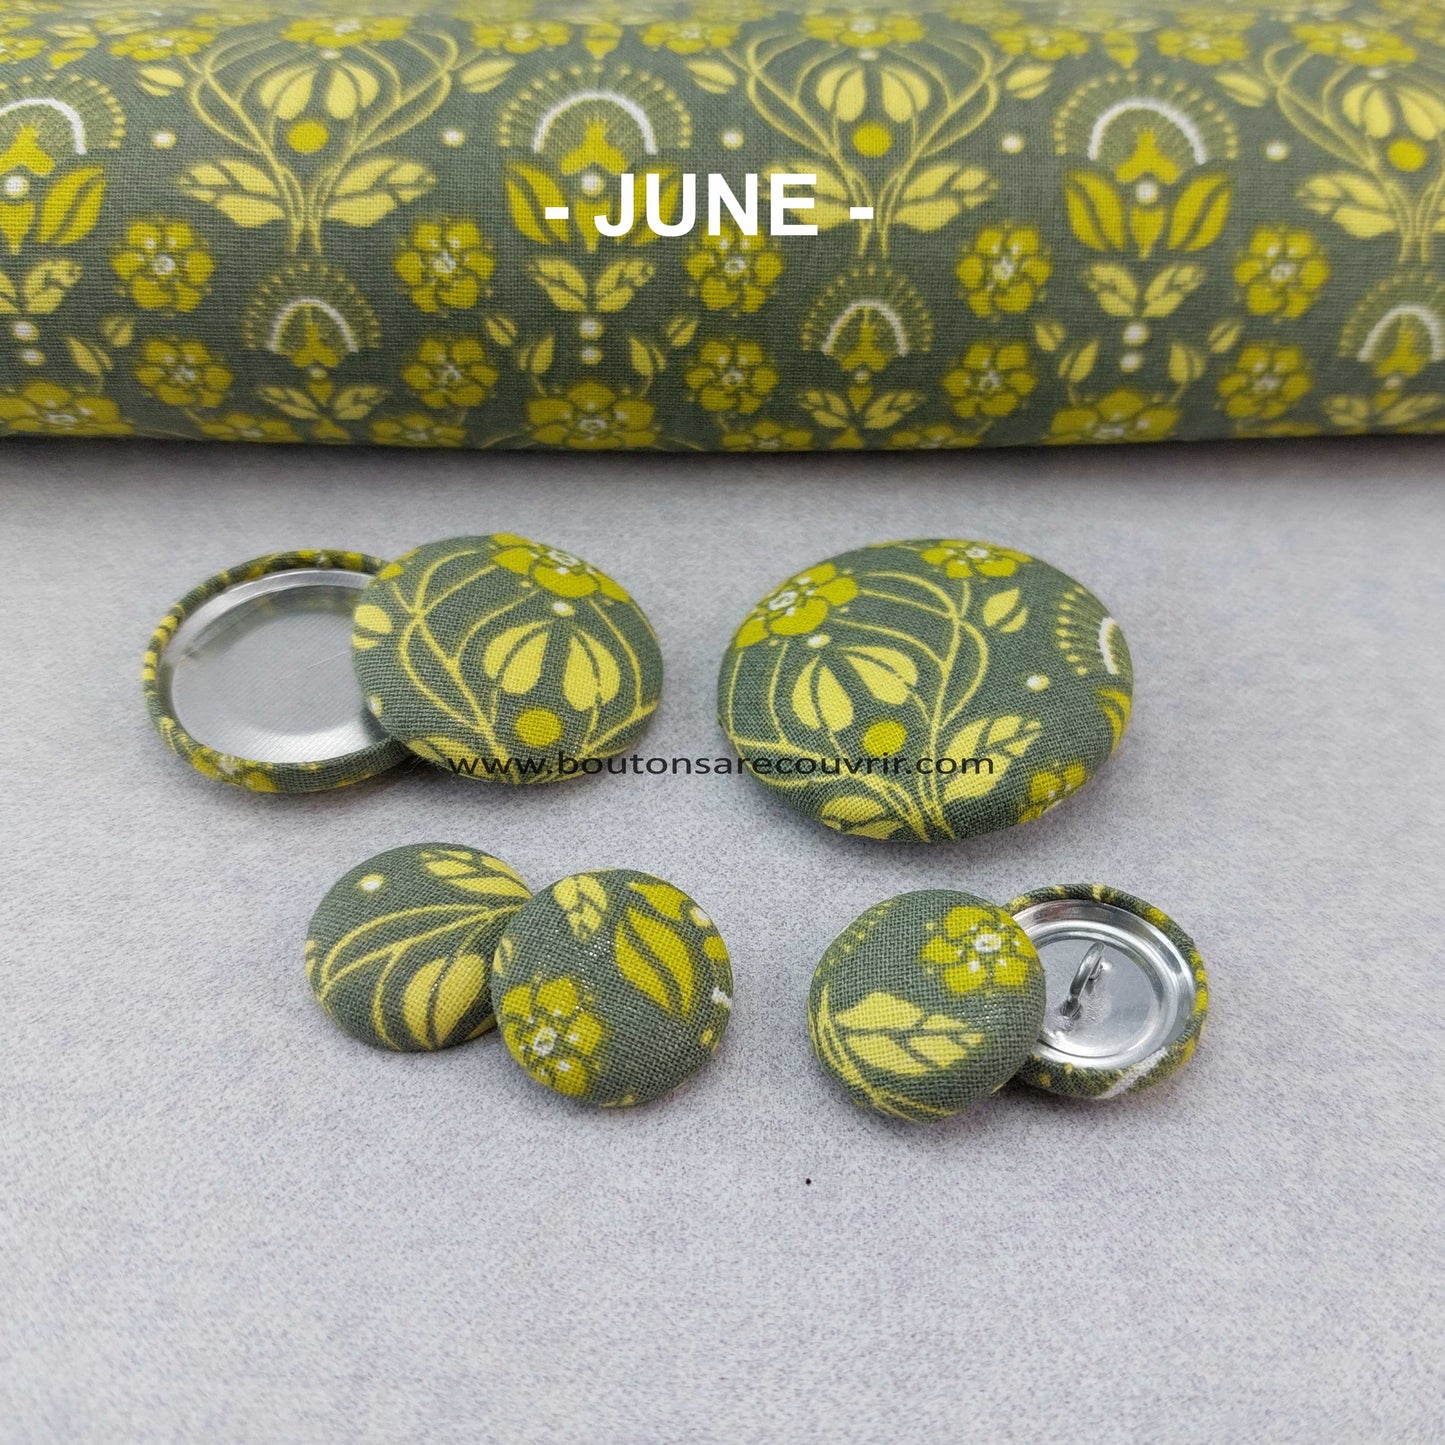 JUNE | Covered button